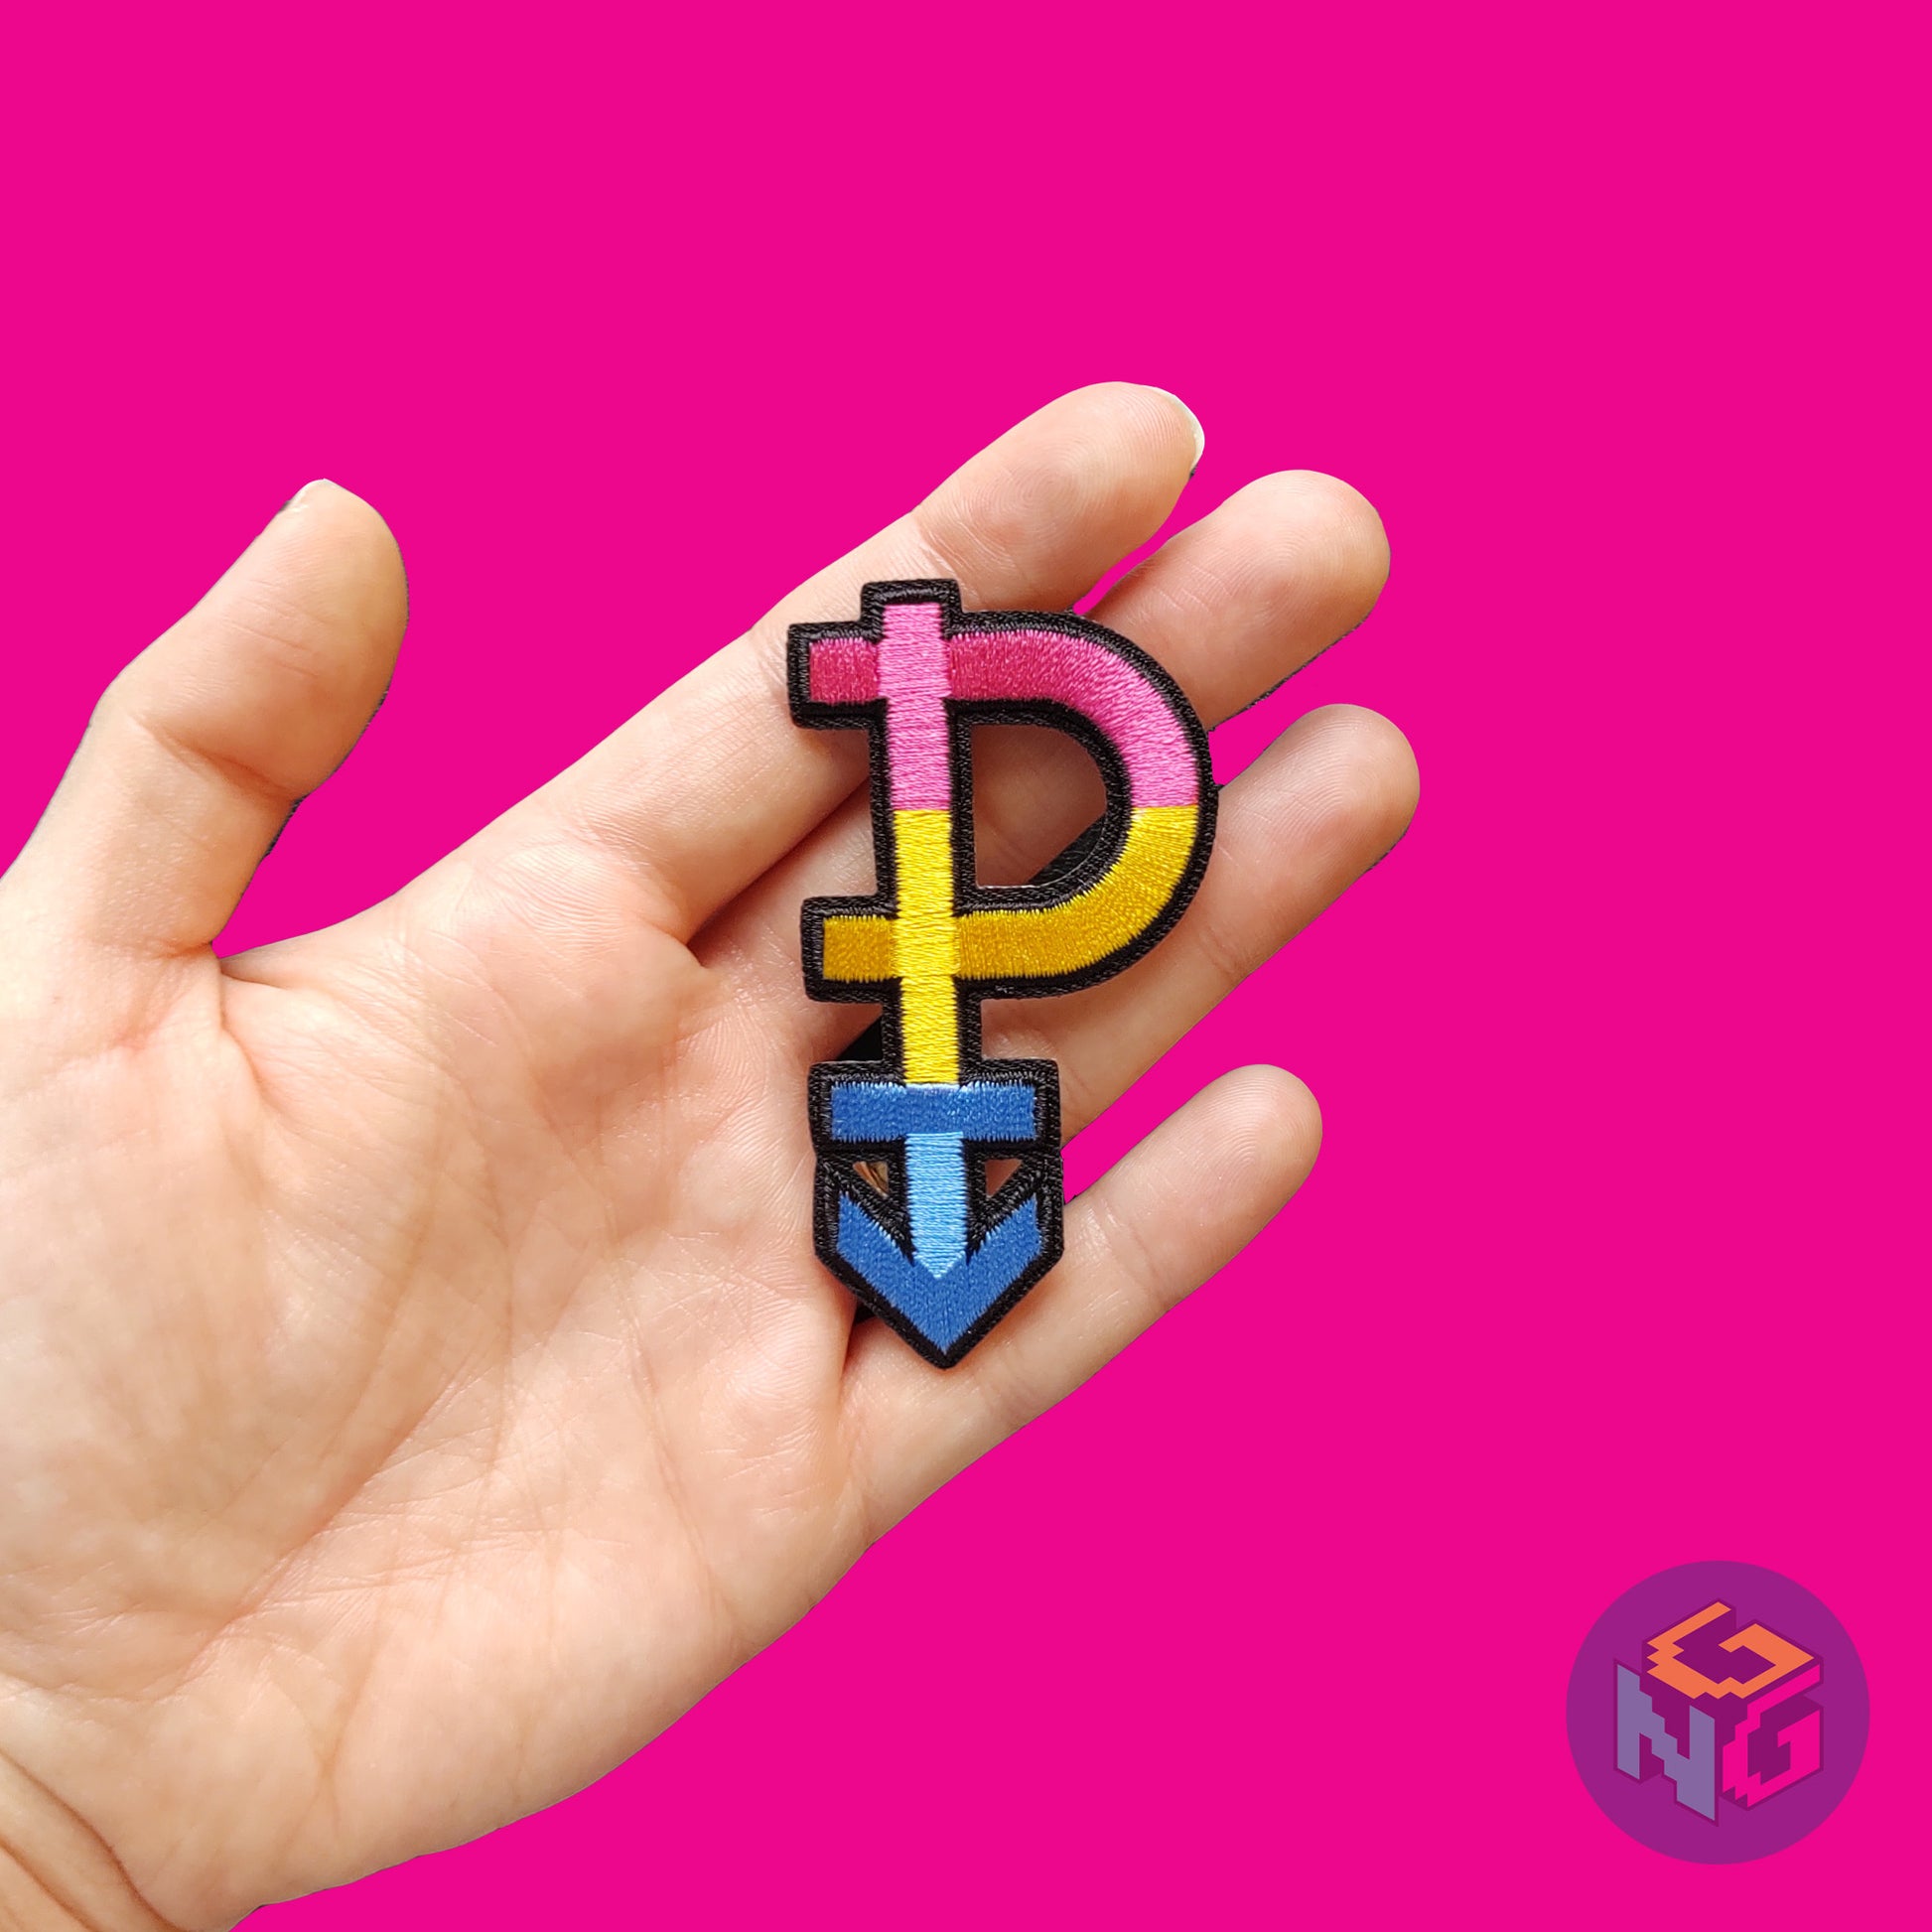 embroidered pansexual patch held in hand in front of hot pink background